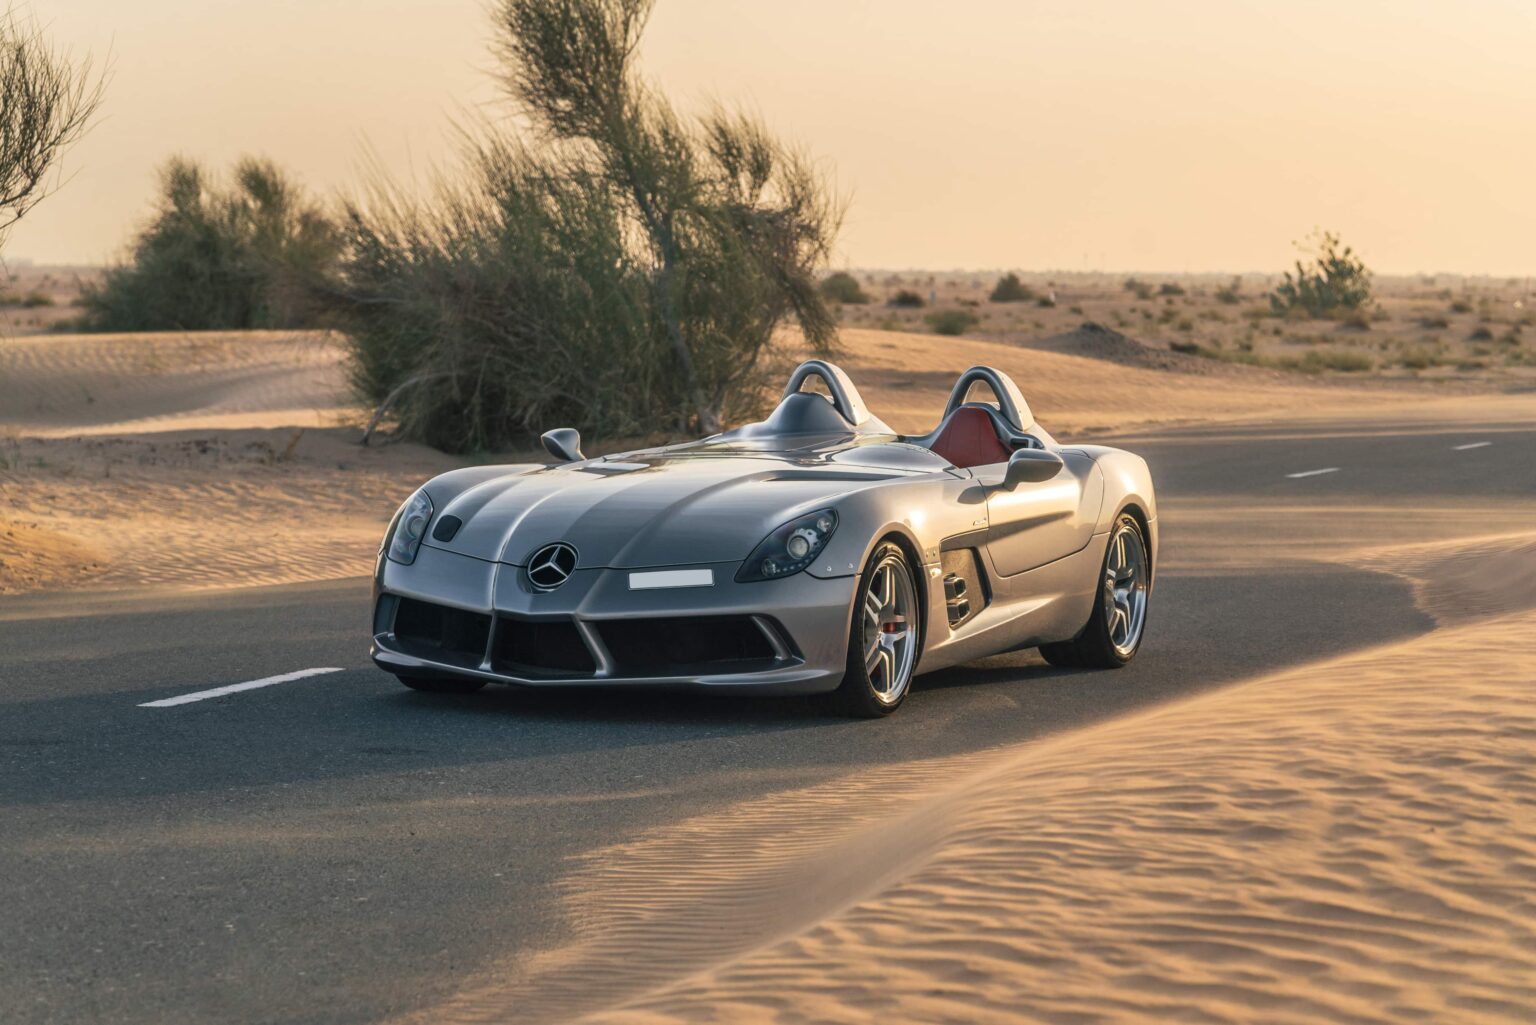 A rare Mercedes-Benz SLR McLaren, sans windscreen or roof, fetches a staggering £2.5 million at auction, joining the ranks of top-selling supercars like the Koenigsegg Agera RSR and Aston Martin Valkyrie.